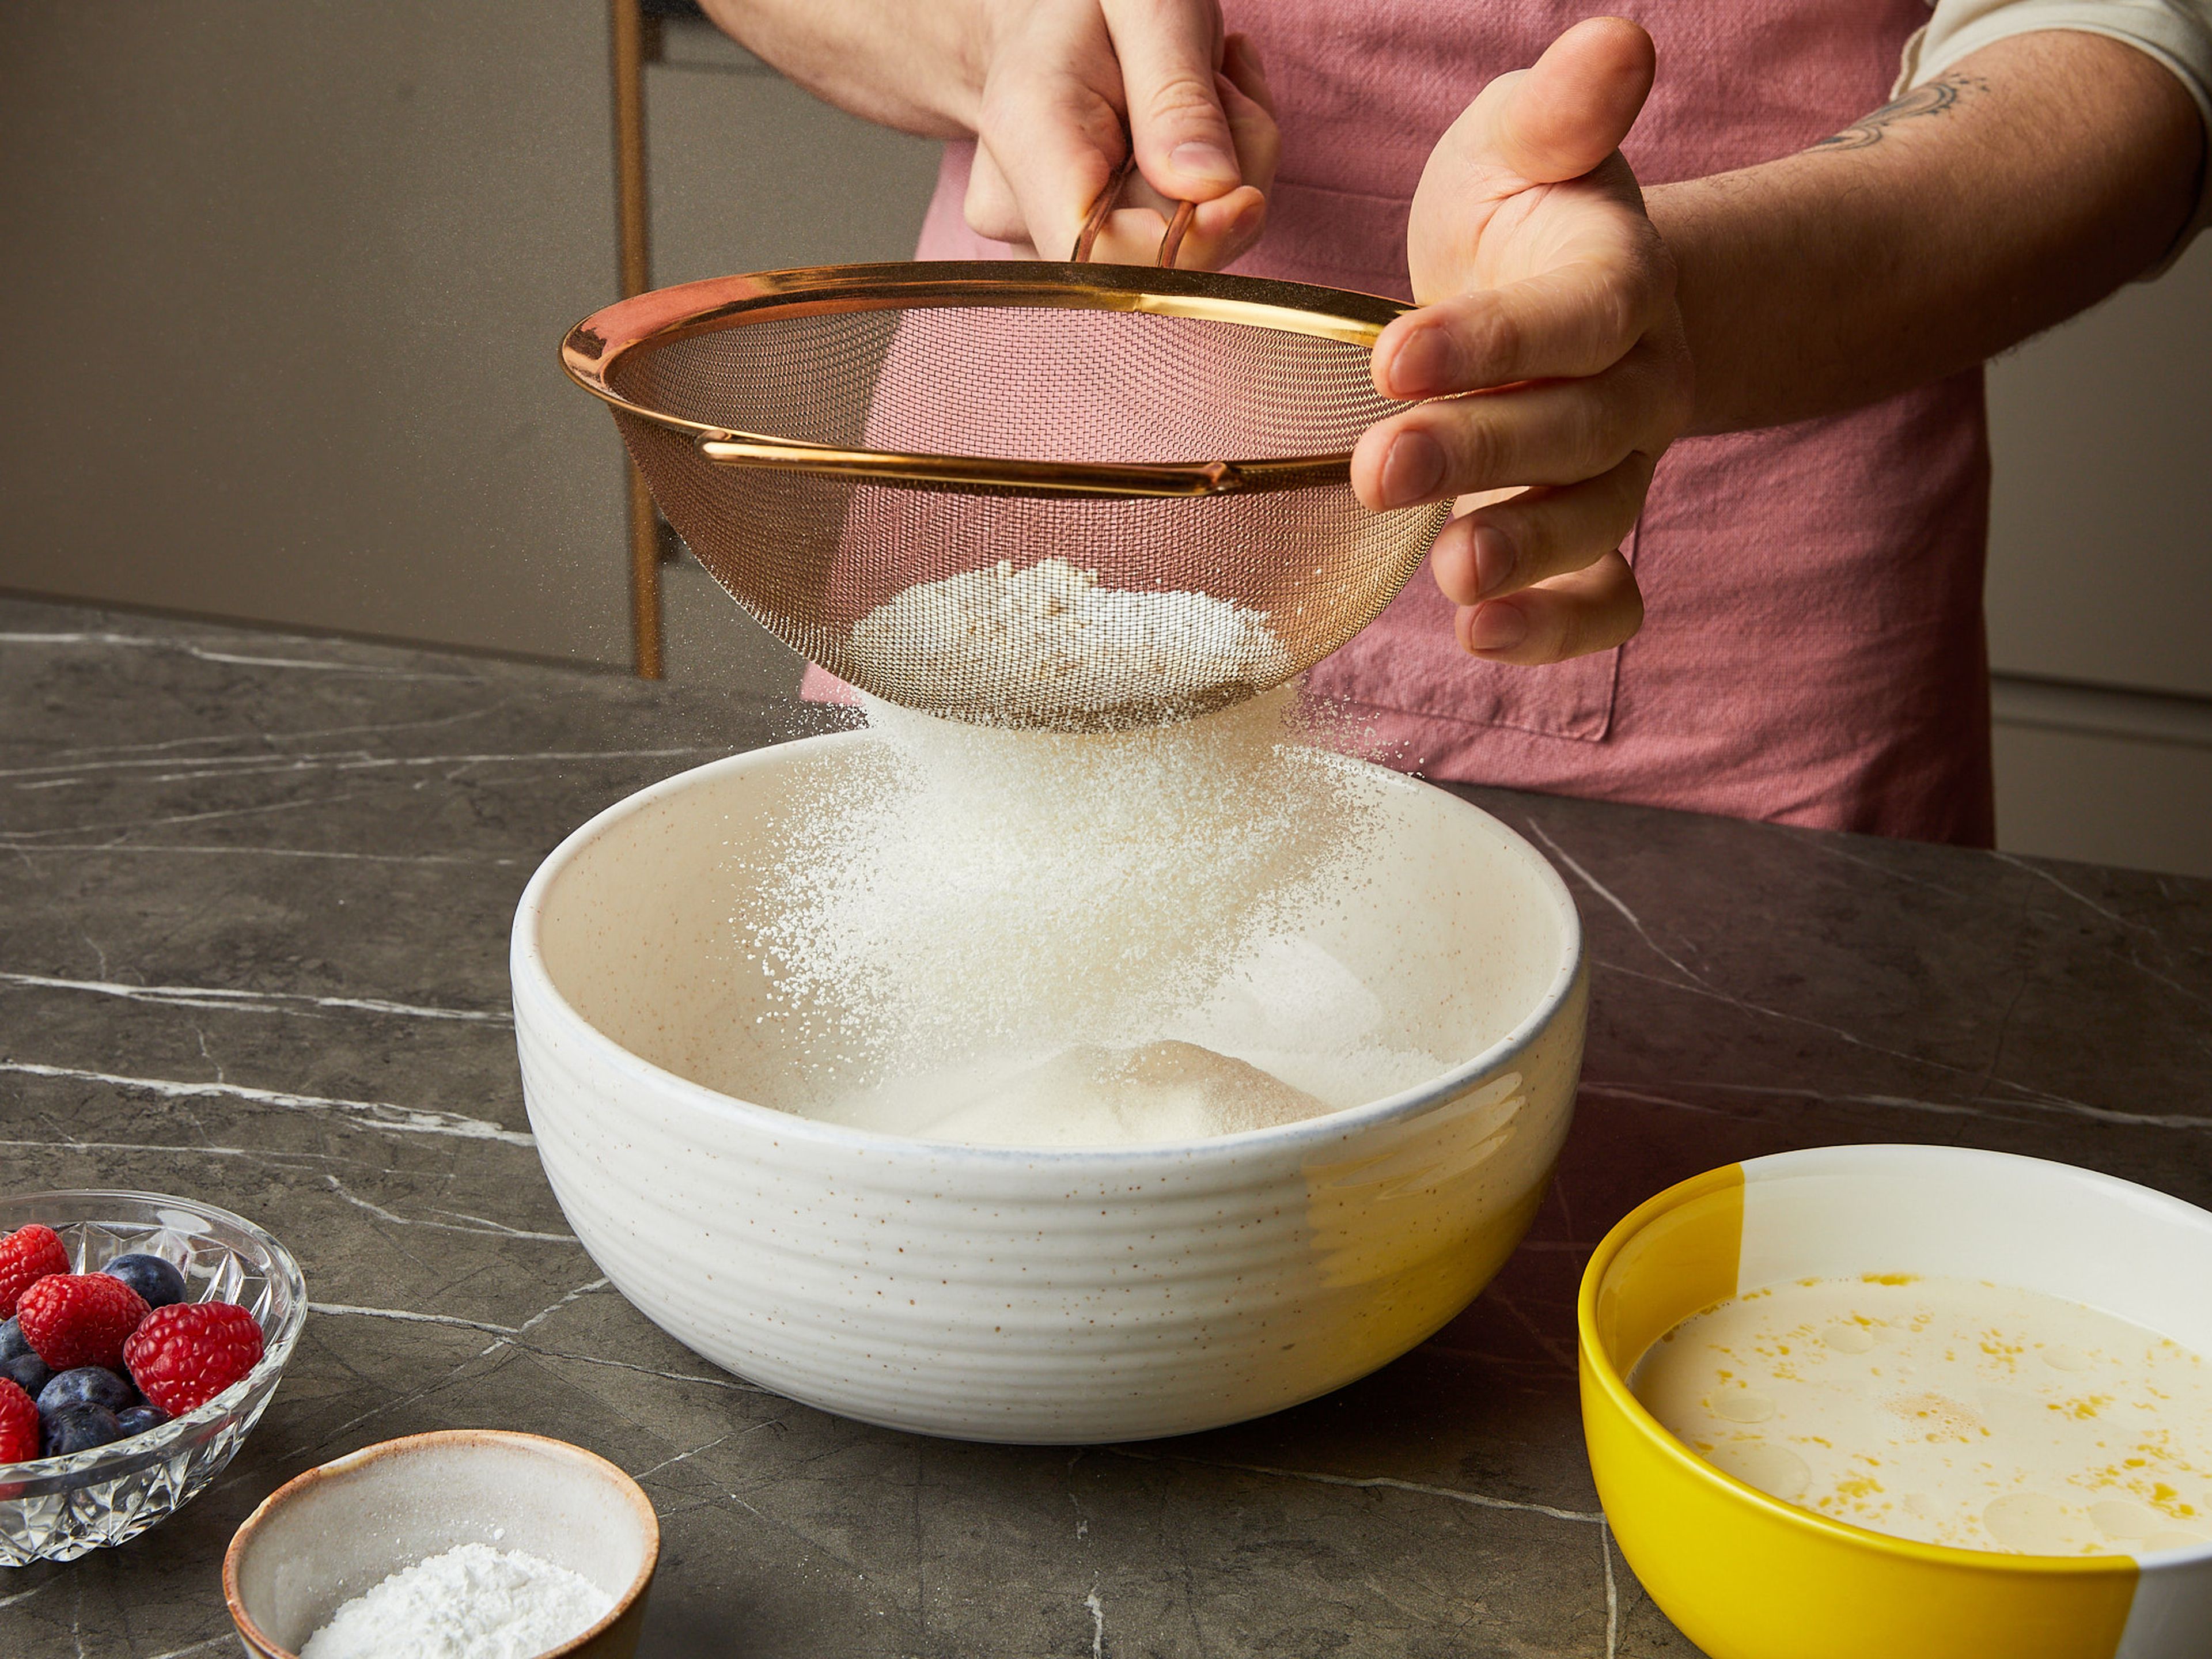 In a large bowl, sift together flour, baking powder, sugar, and salt.